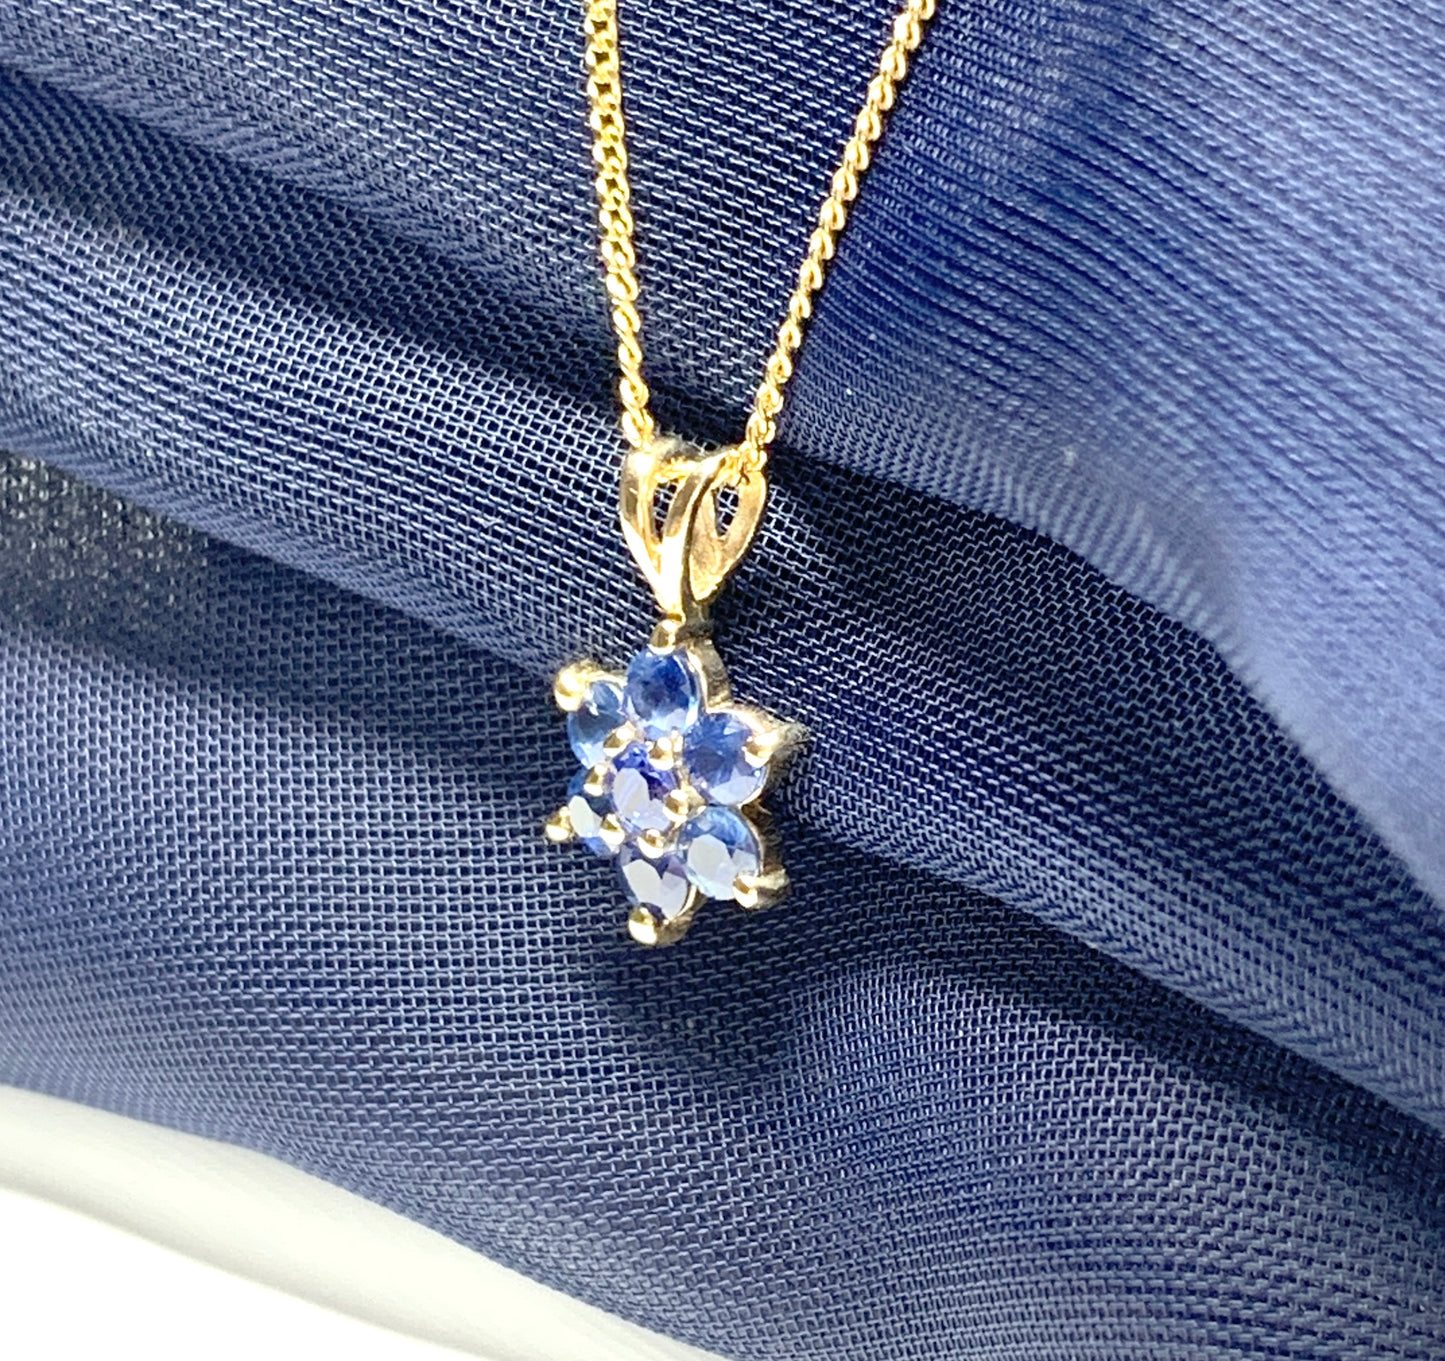 Real blue sapphire daisy cluster necklace pendant